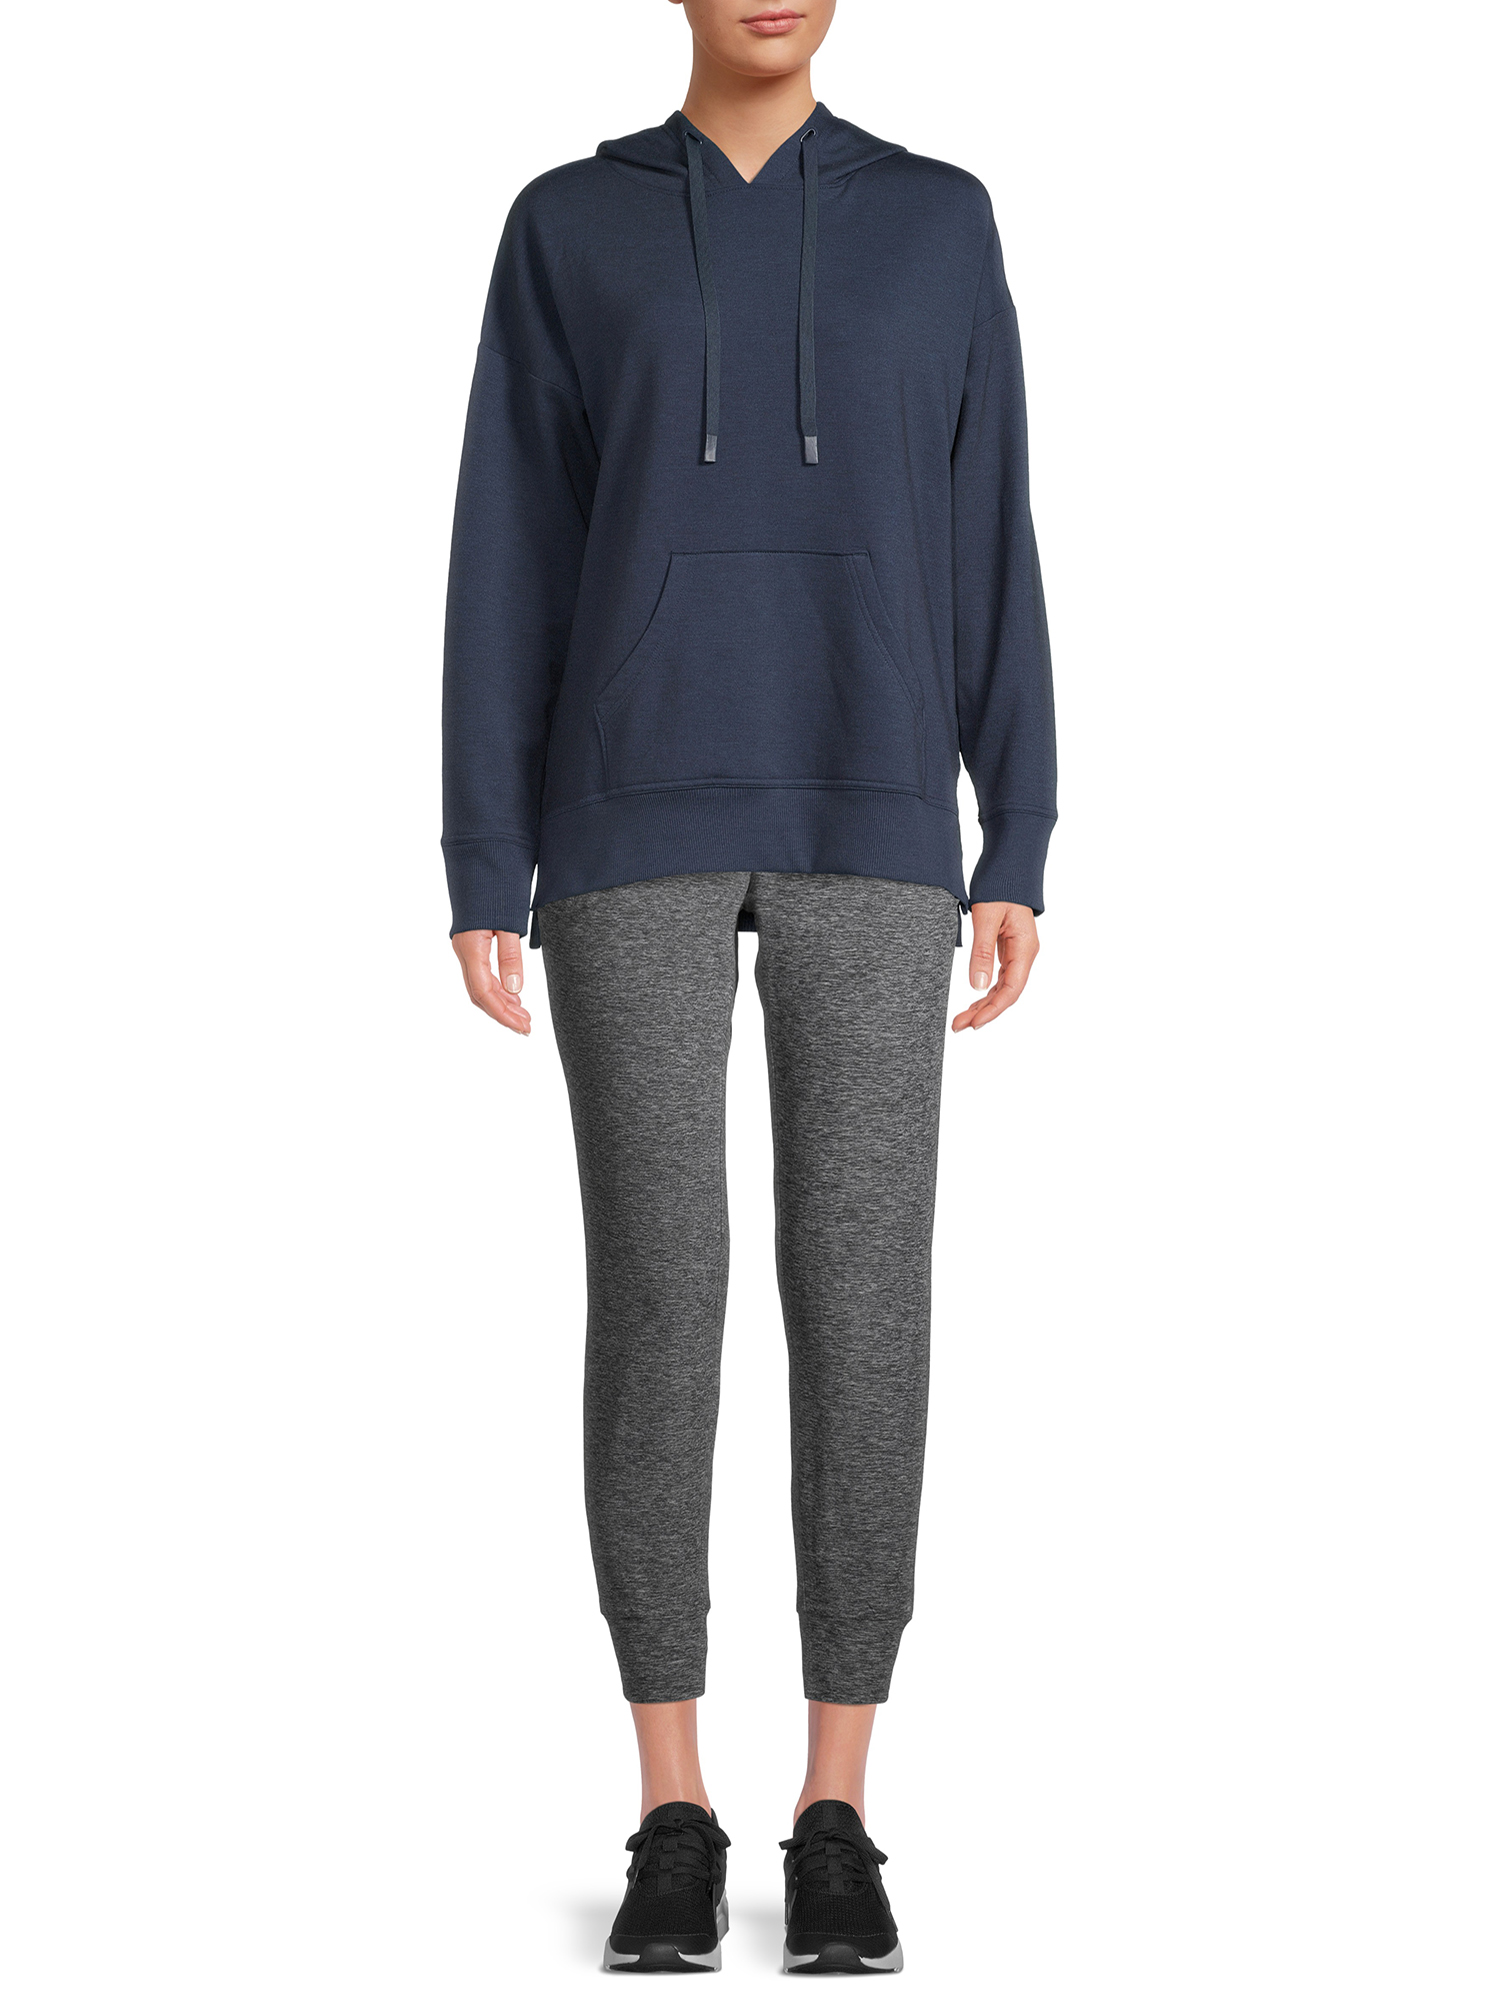 Athletic Works Women's Soft Hoodie With Front Pockets - image 5 of 5